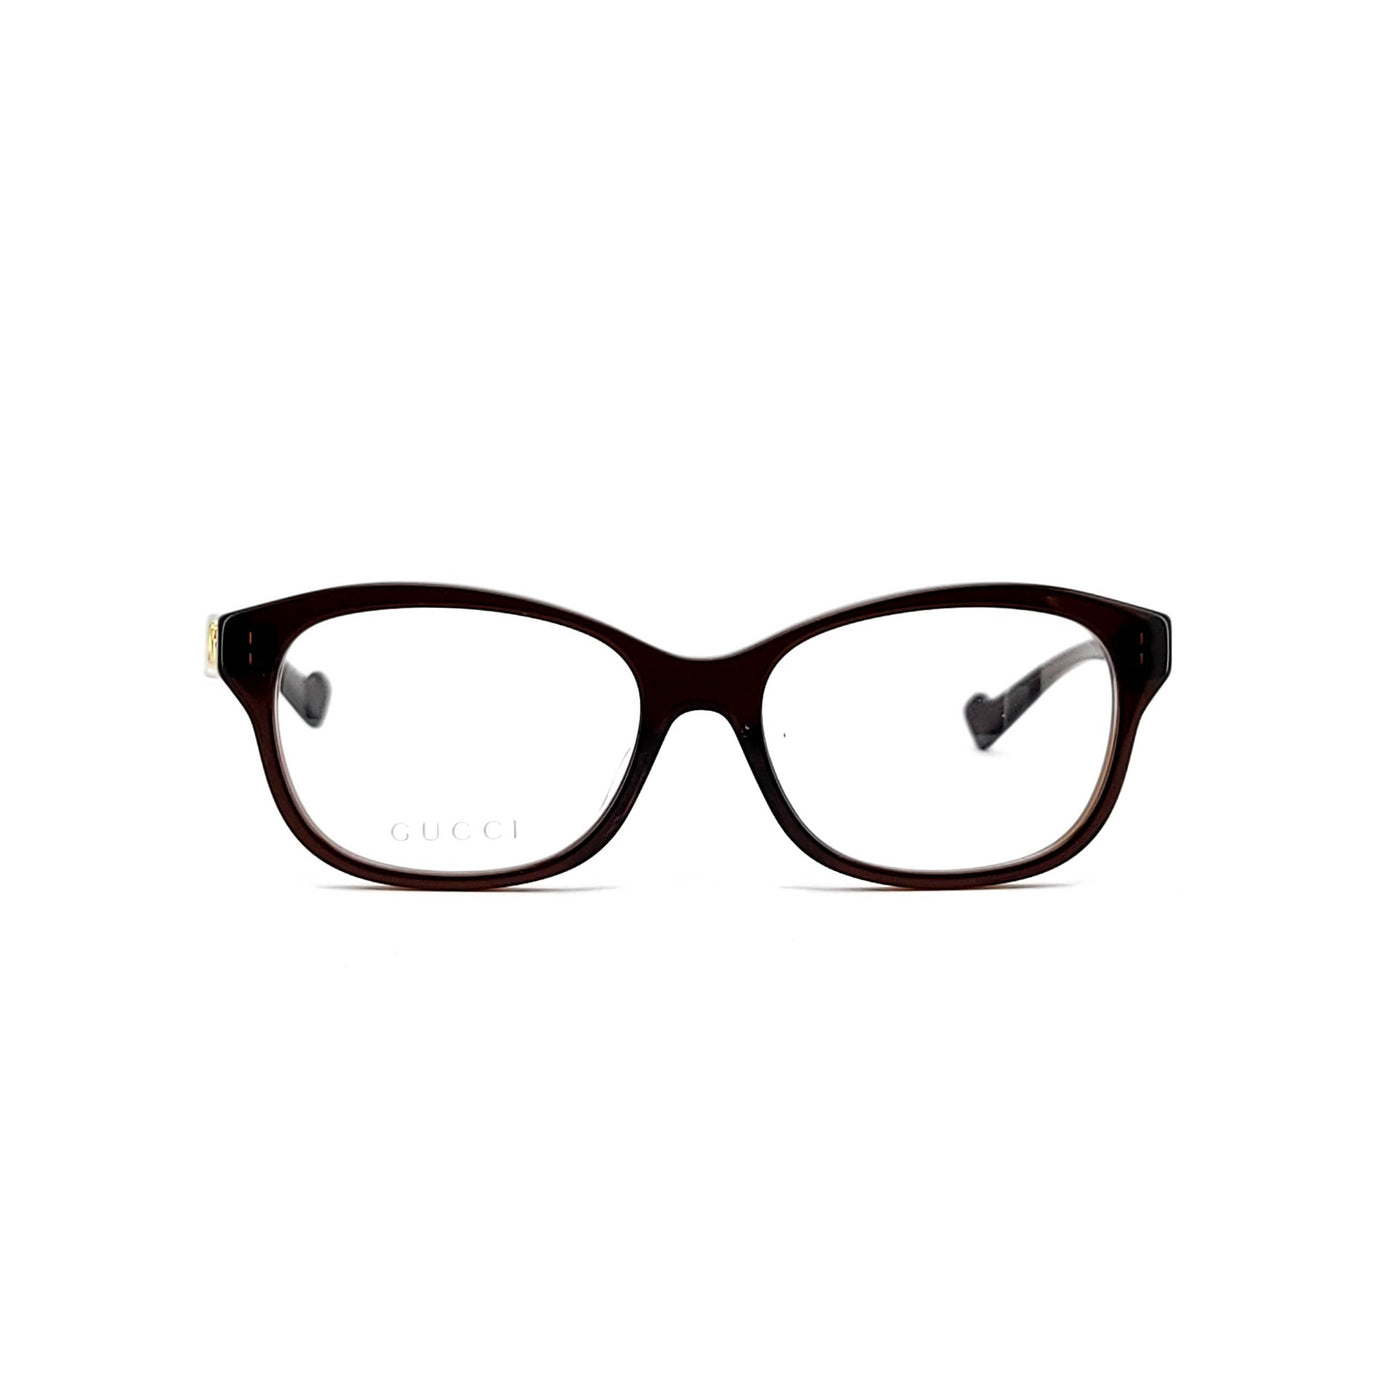 Gucci GG 0961OA/003 | Eyeglasses with FREE Anti Radiation Lenses - Vision Express Optical Philippines